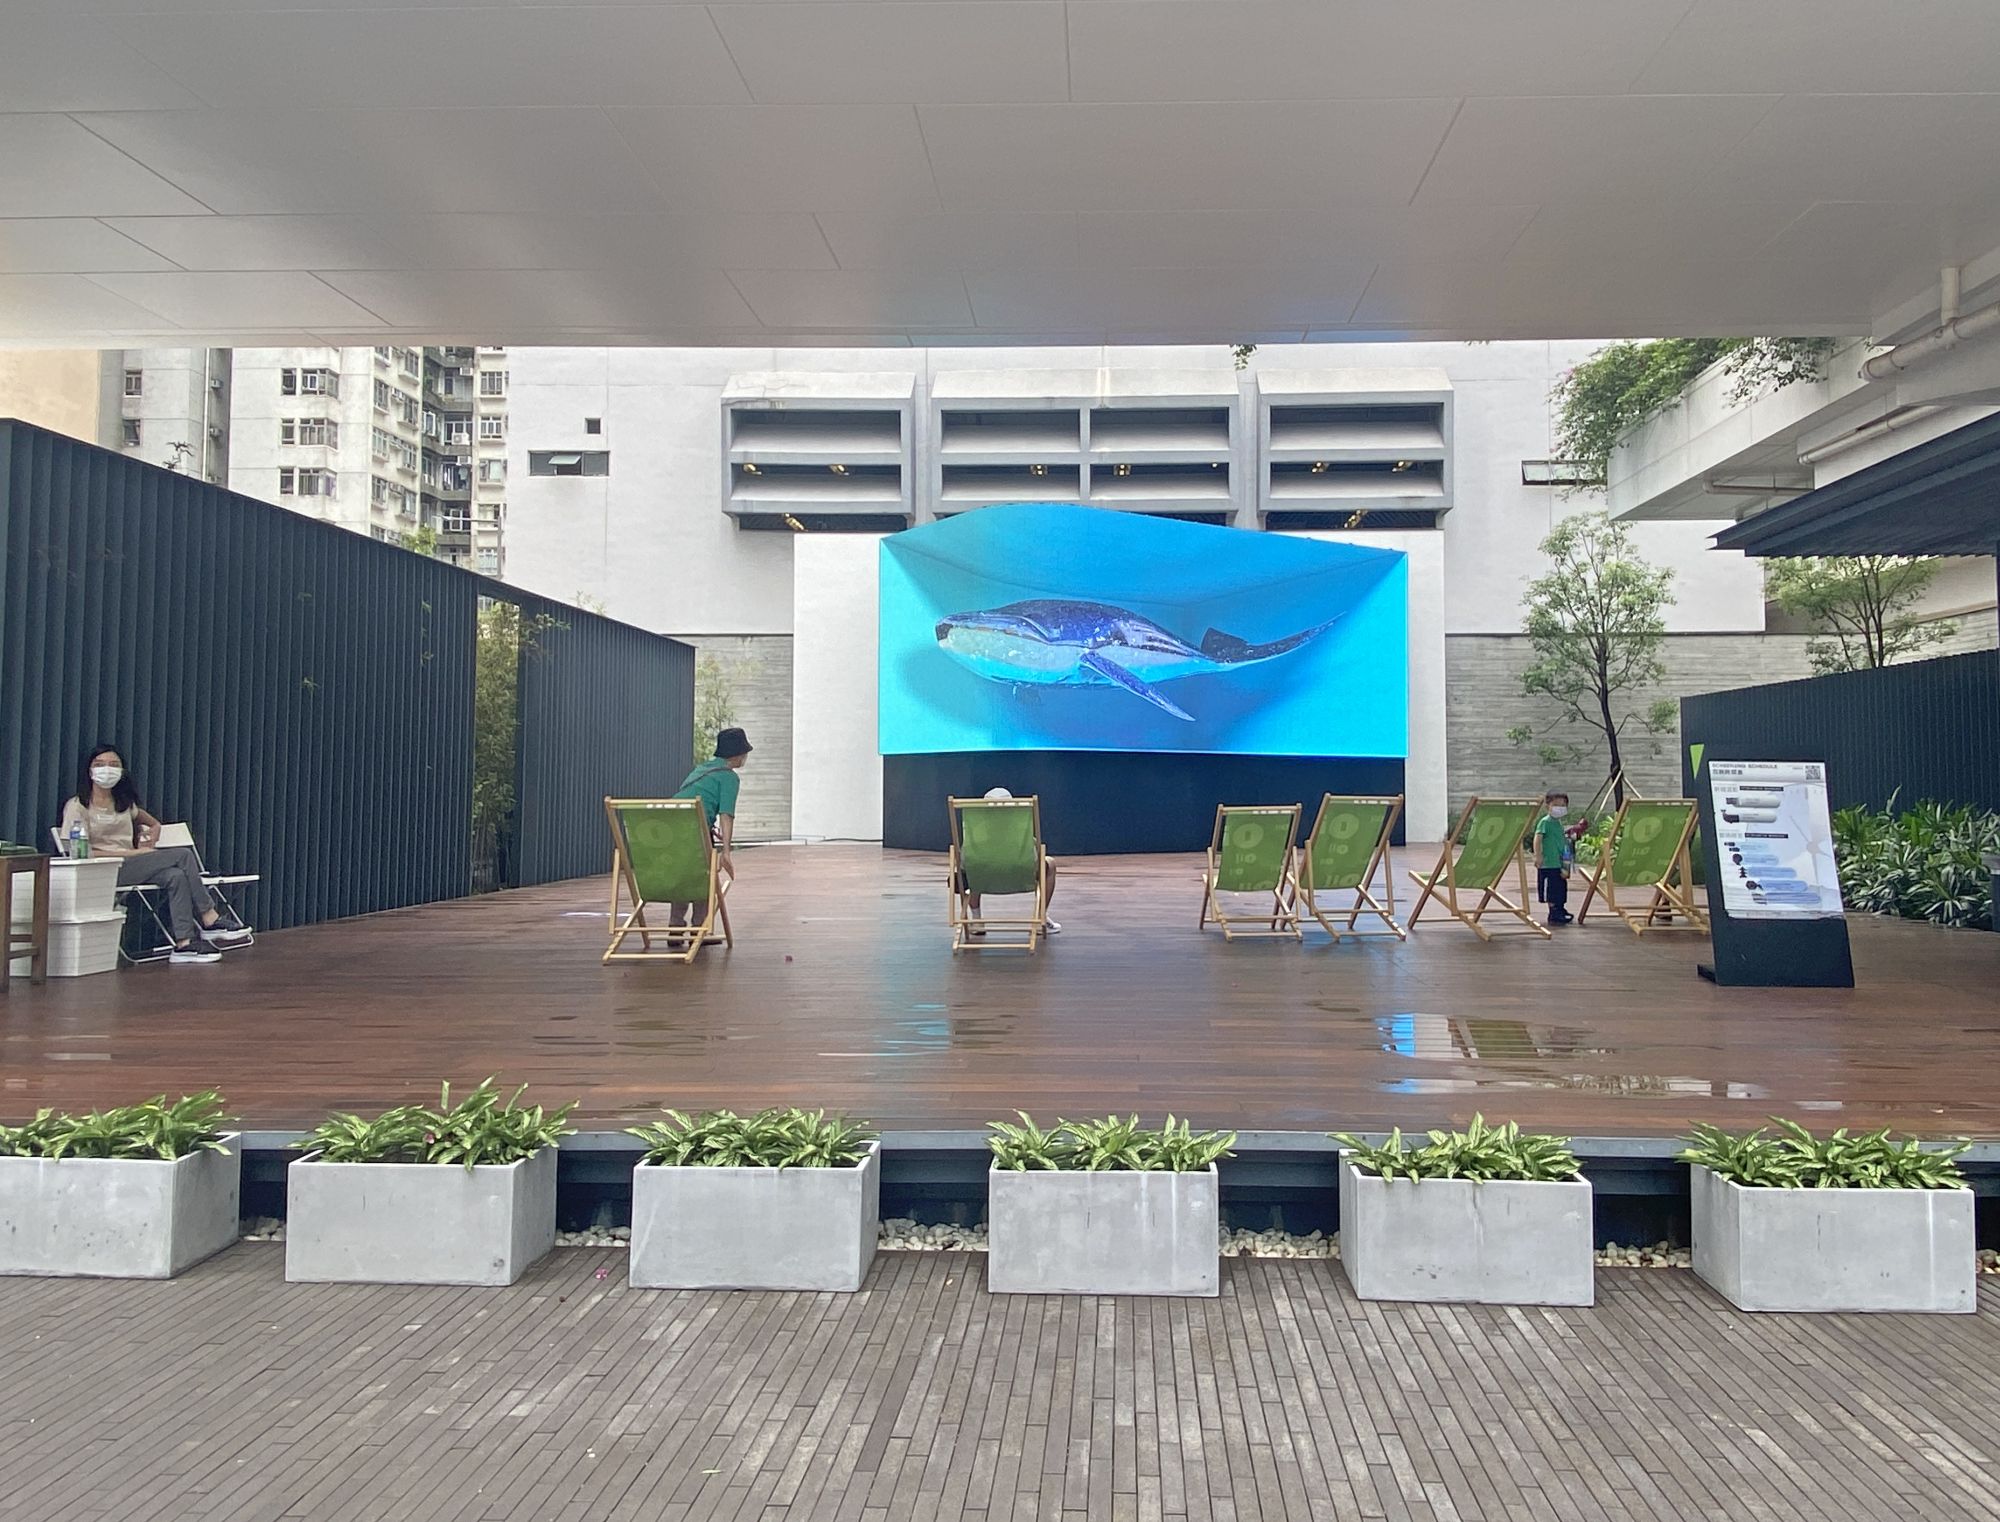 The new extension of the Oil Street Art Space (Oi!) in North Point has been opened to the public recently, hoping to provide more art and leisure space in the district and become a cultural landmark in Hong Kong.